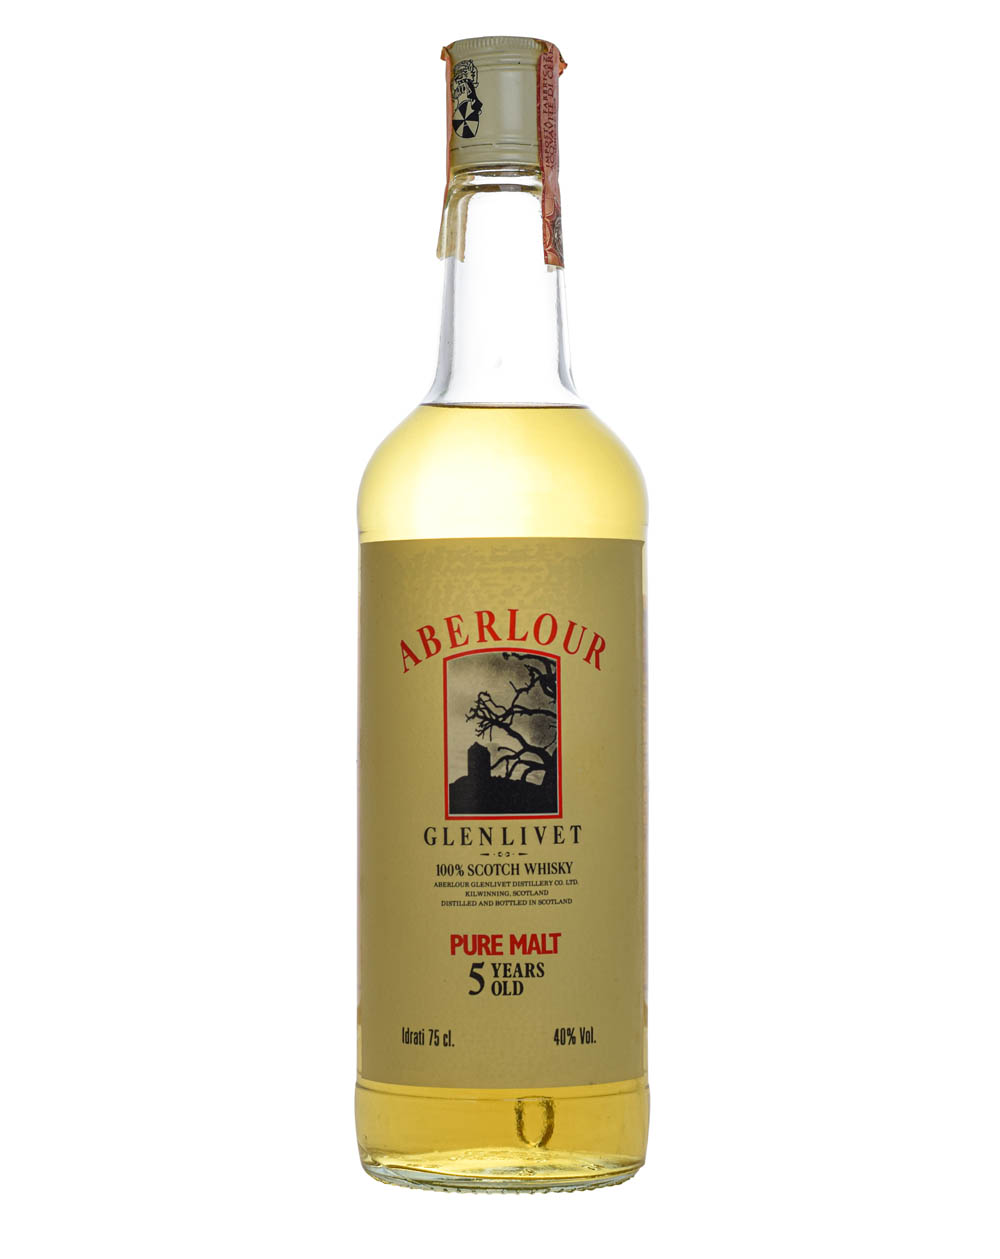 Aberlour Glenlivet 5 Years Old Pure MaltMusthave Malts MHM